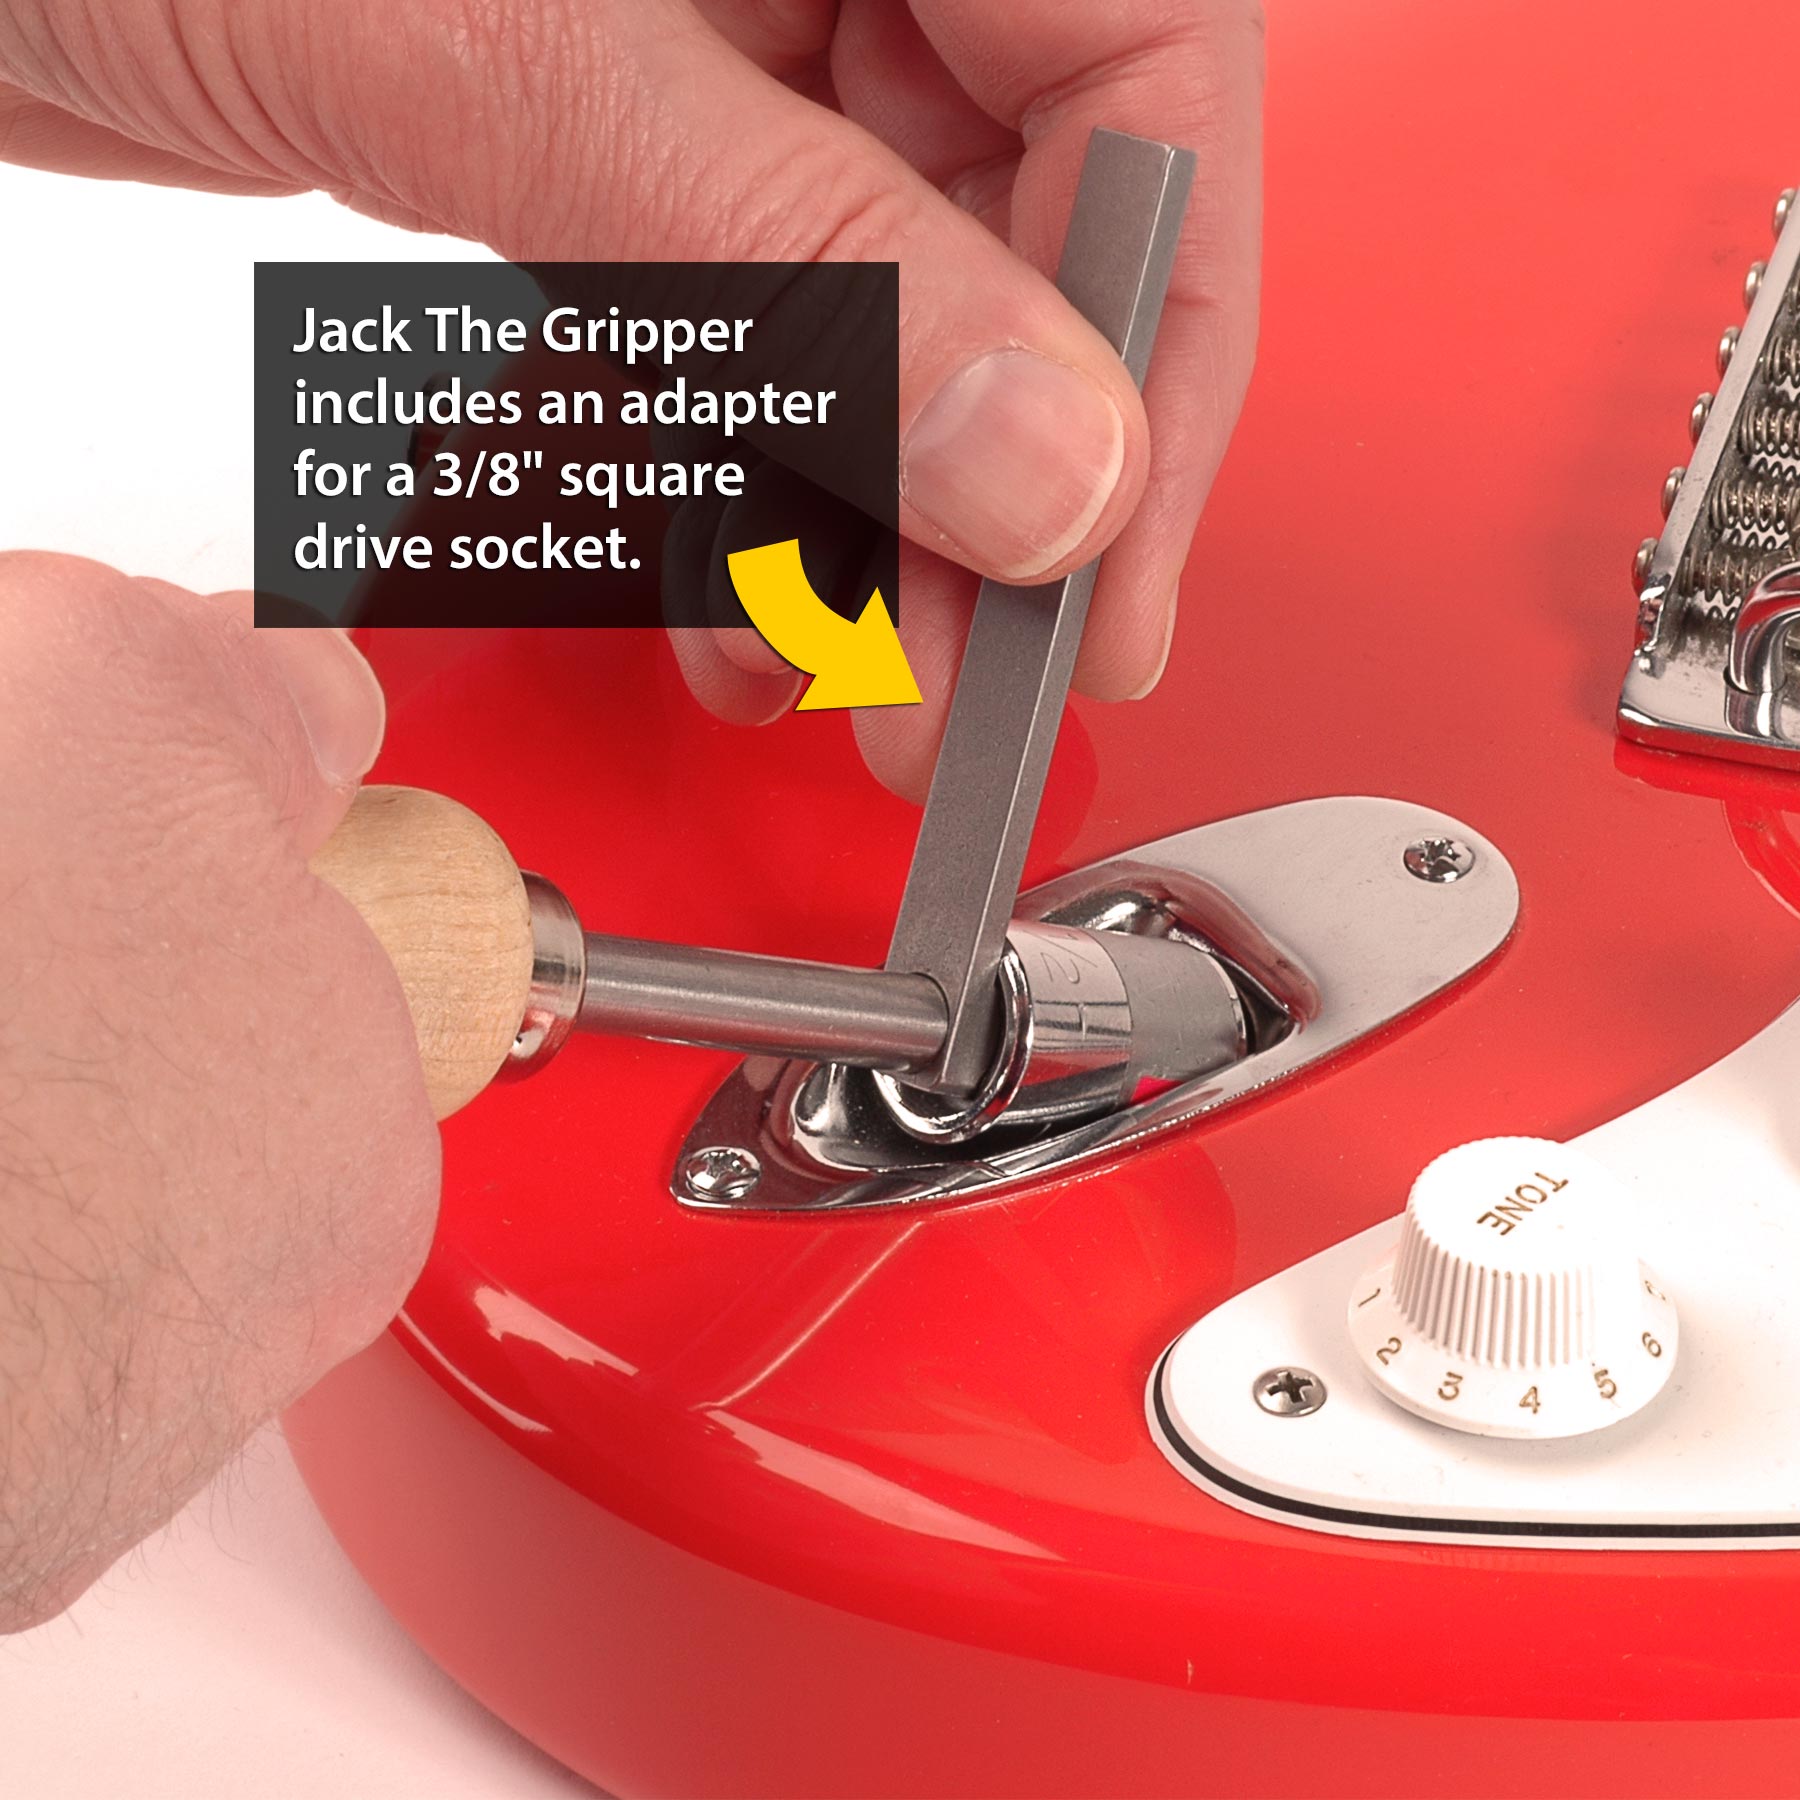 Jack The Gripper